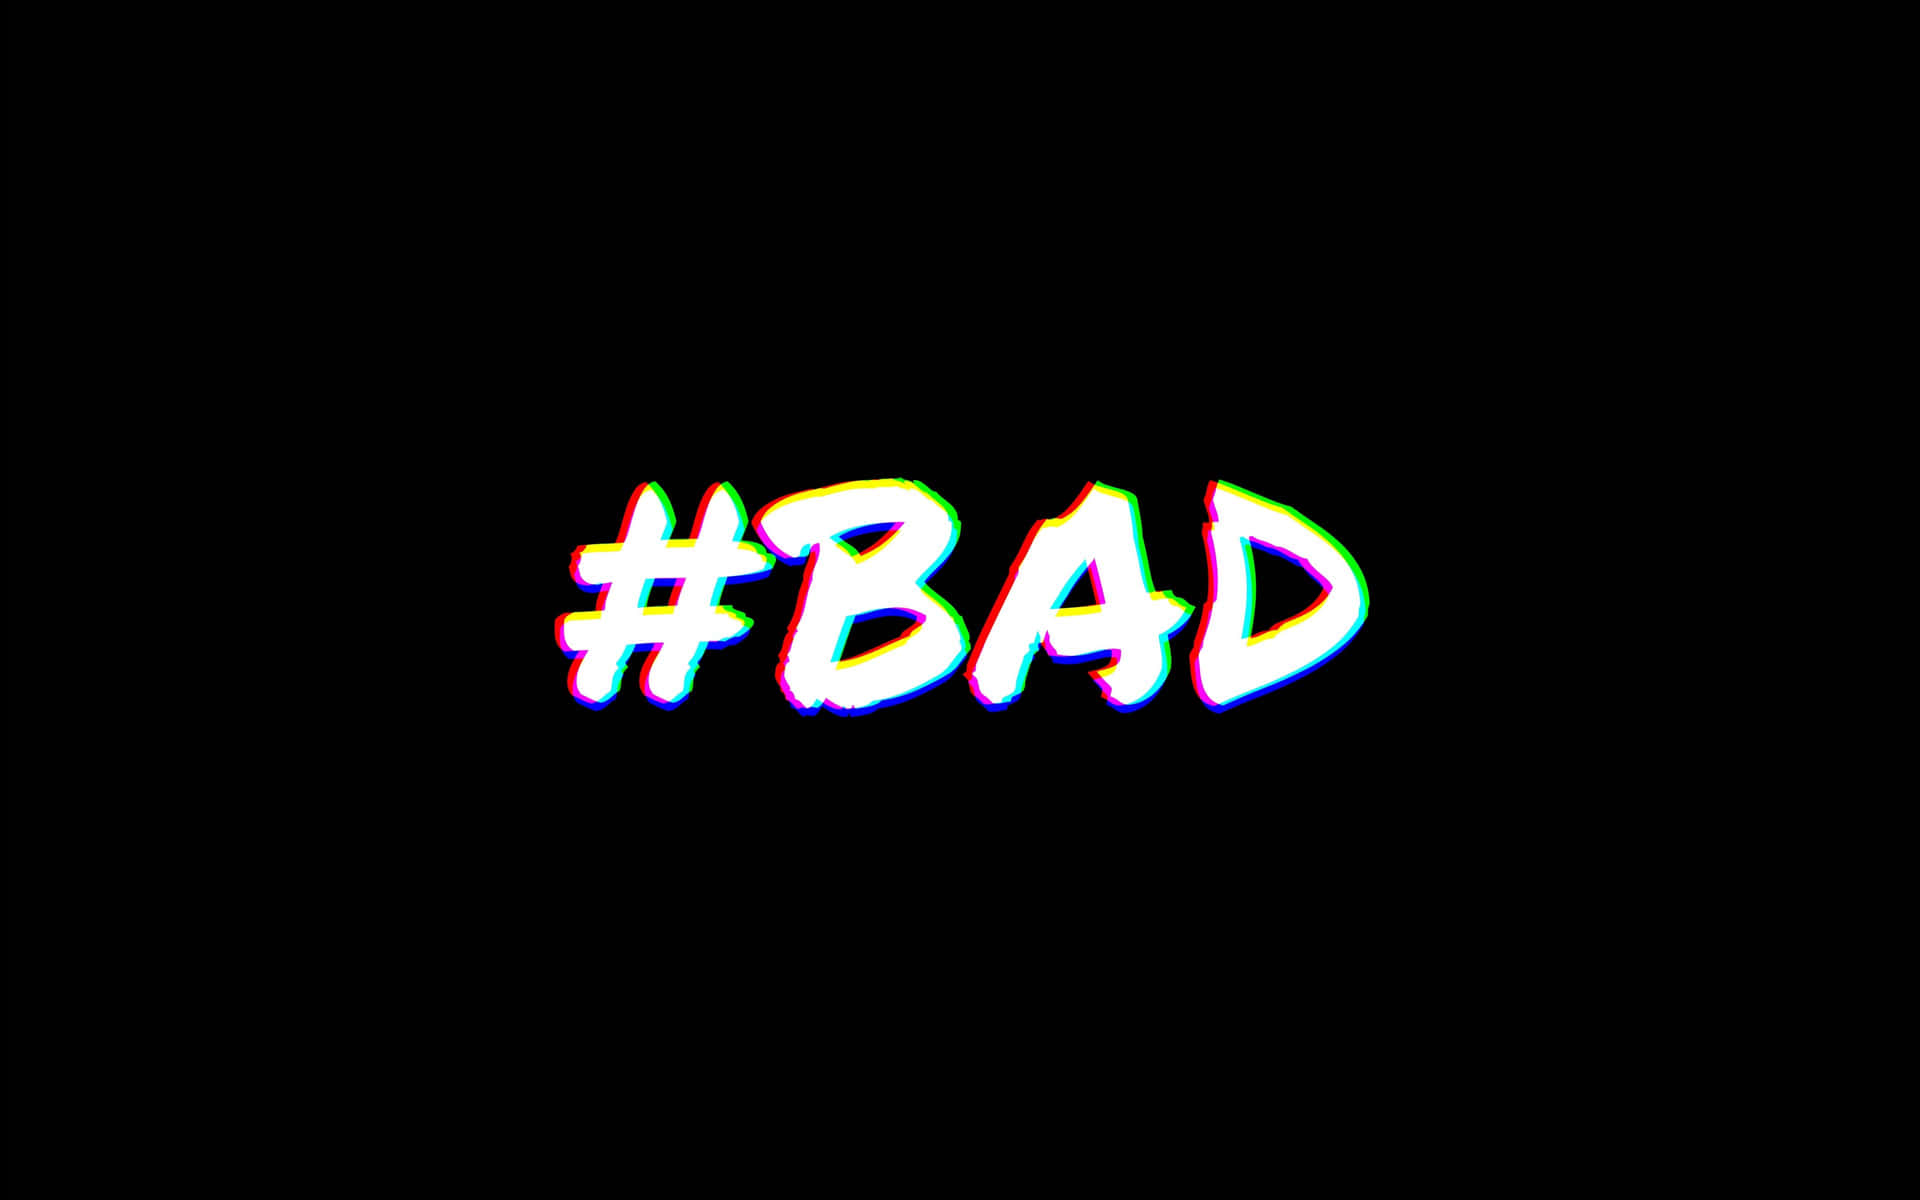 Bad - A Black Background With The Word Bad